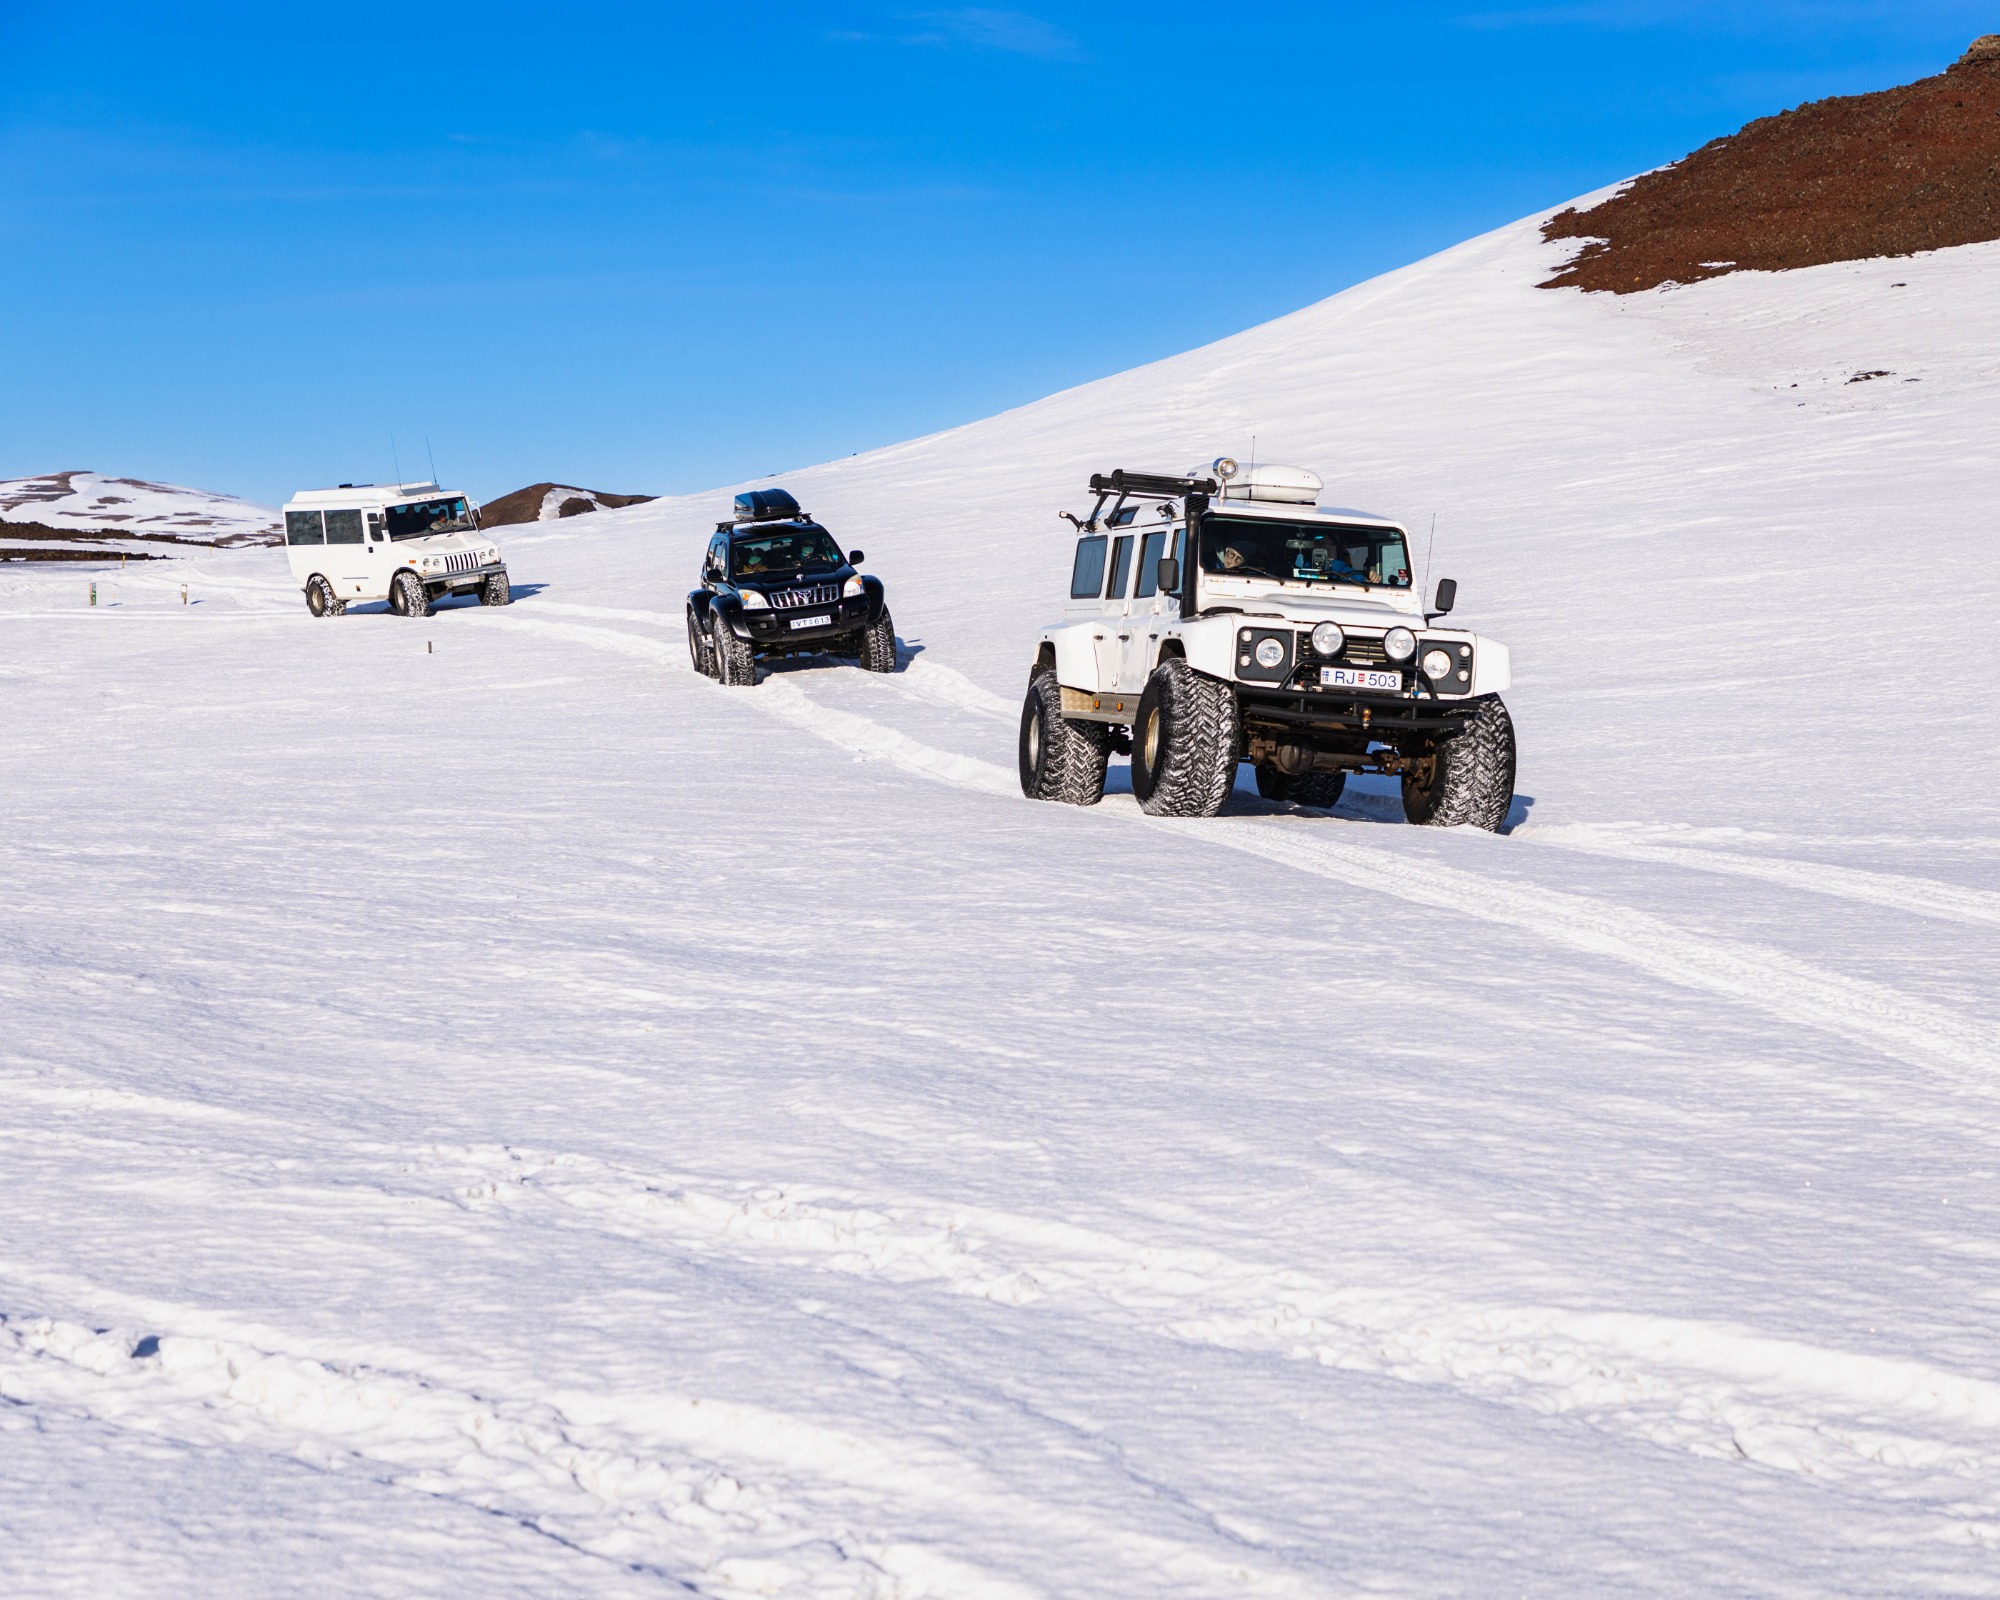 Super Jeeps on snow in North Iceland